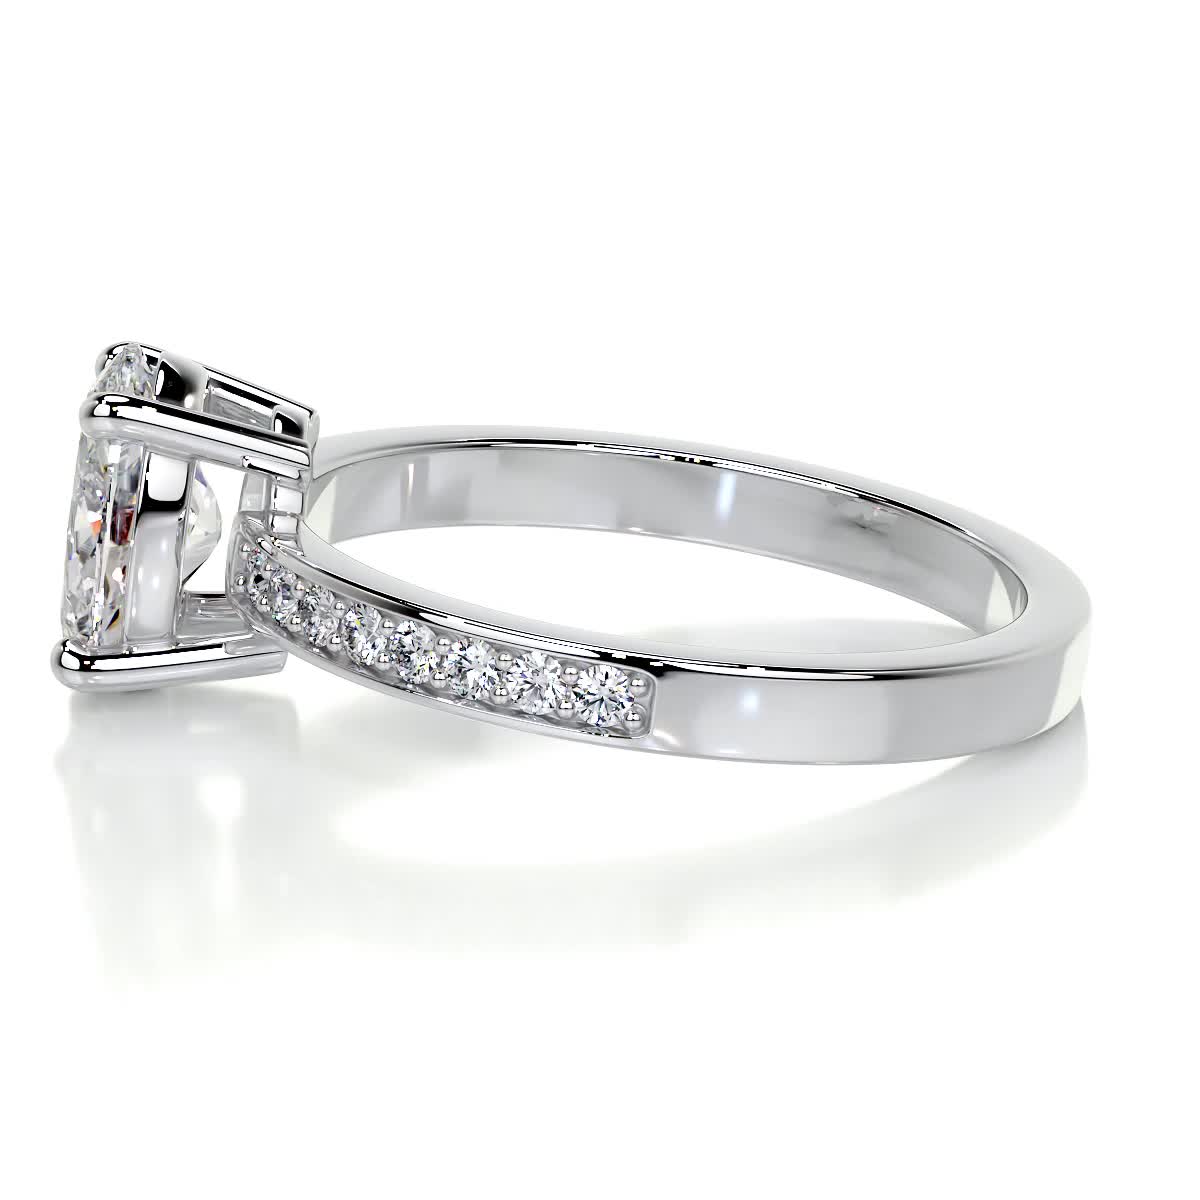 1.0 CT Oval Solitaire CVD F/SI1 Diamond Engagement Ring 6